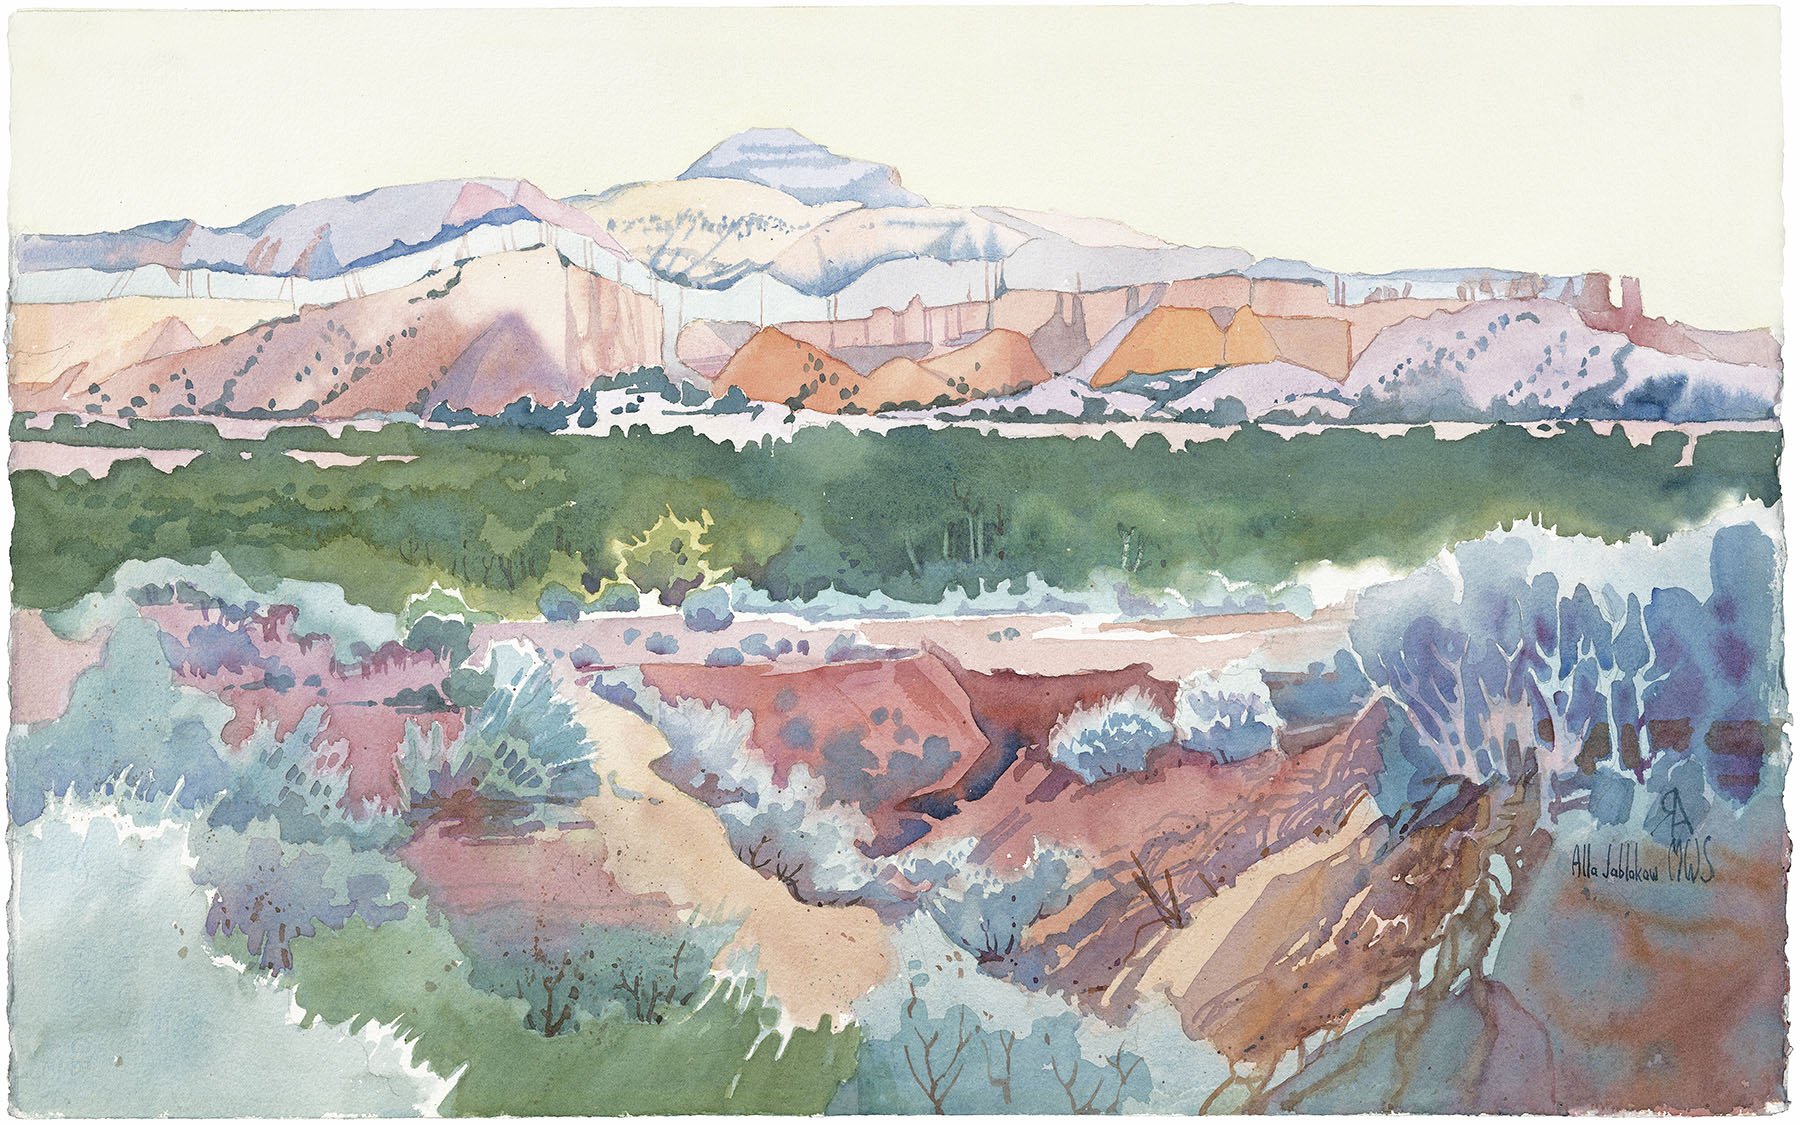 Ghost Ranch, NM, 1-951 (Natalie)